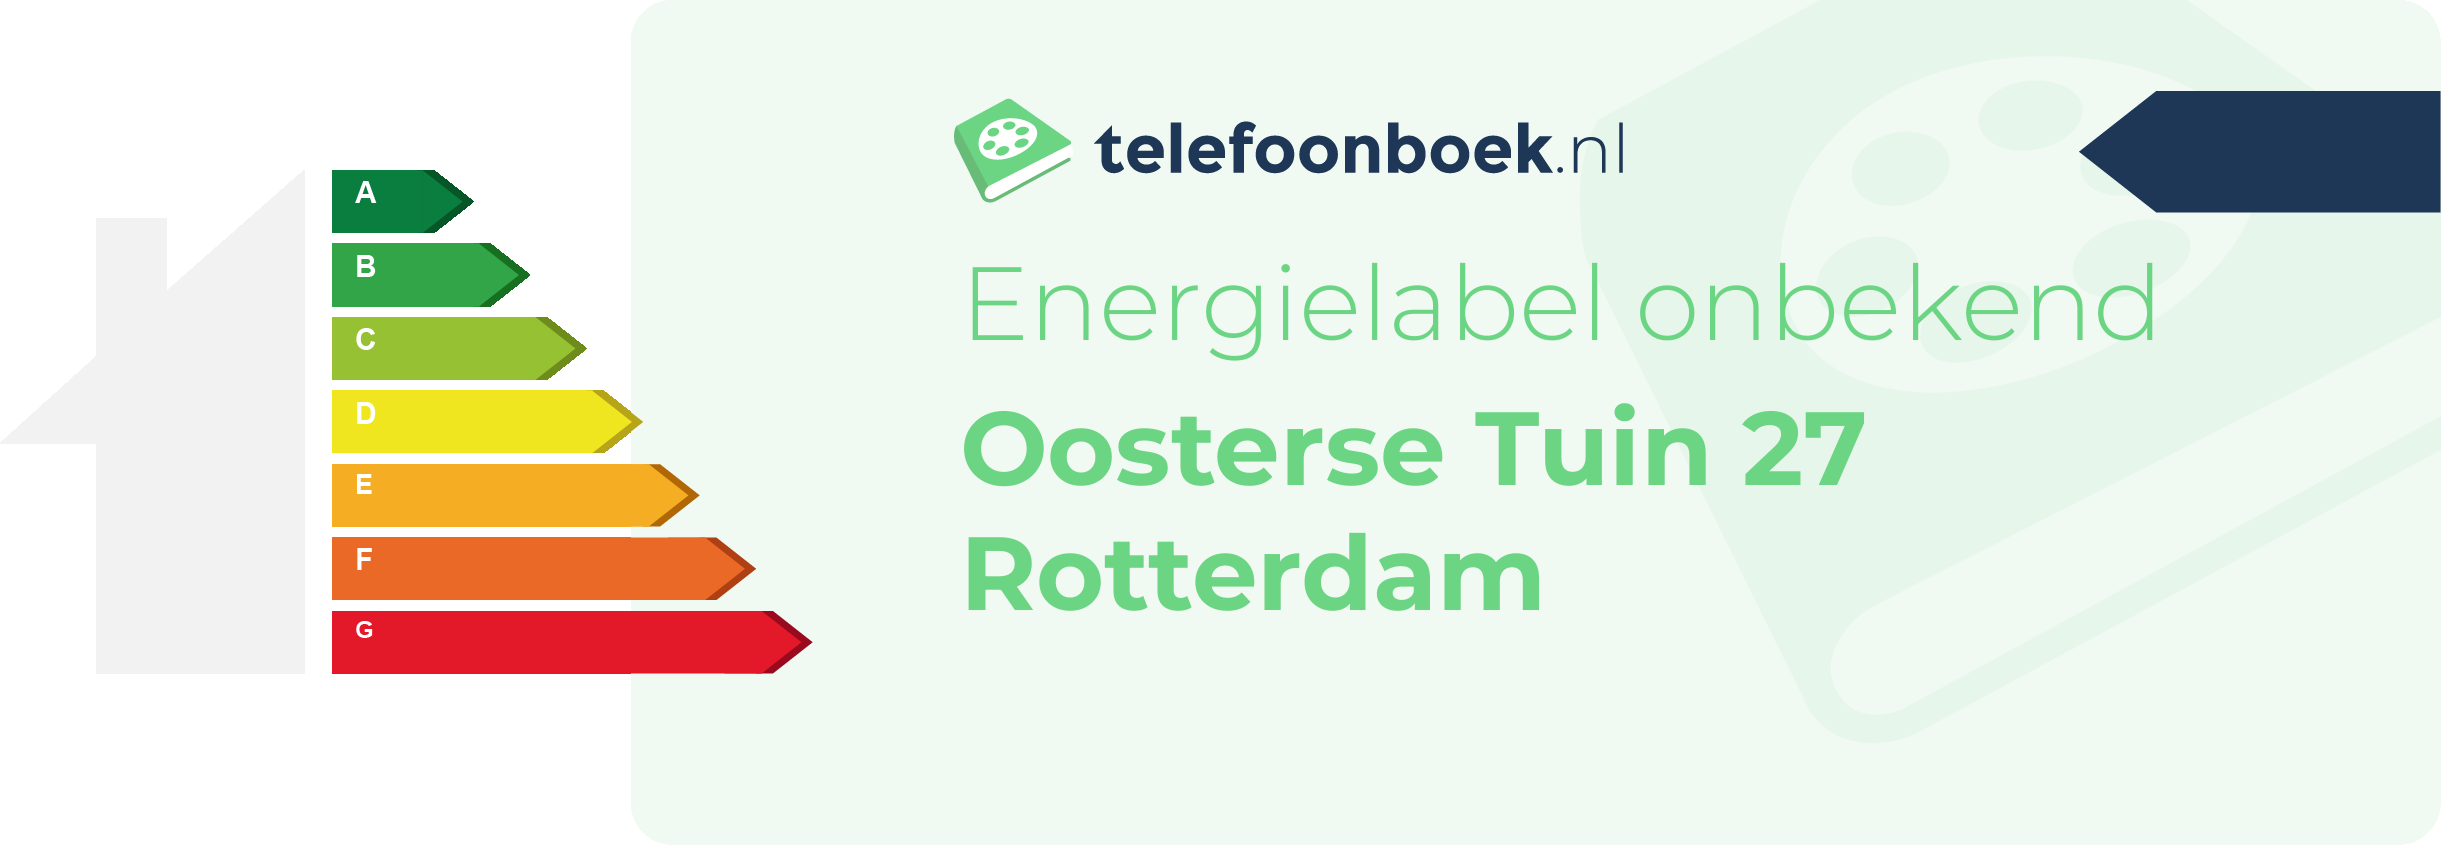 Energielabel Oosterse Tuin 27 Rotterdam